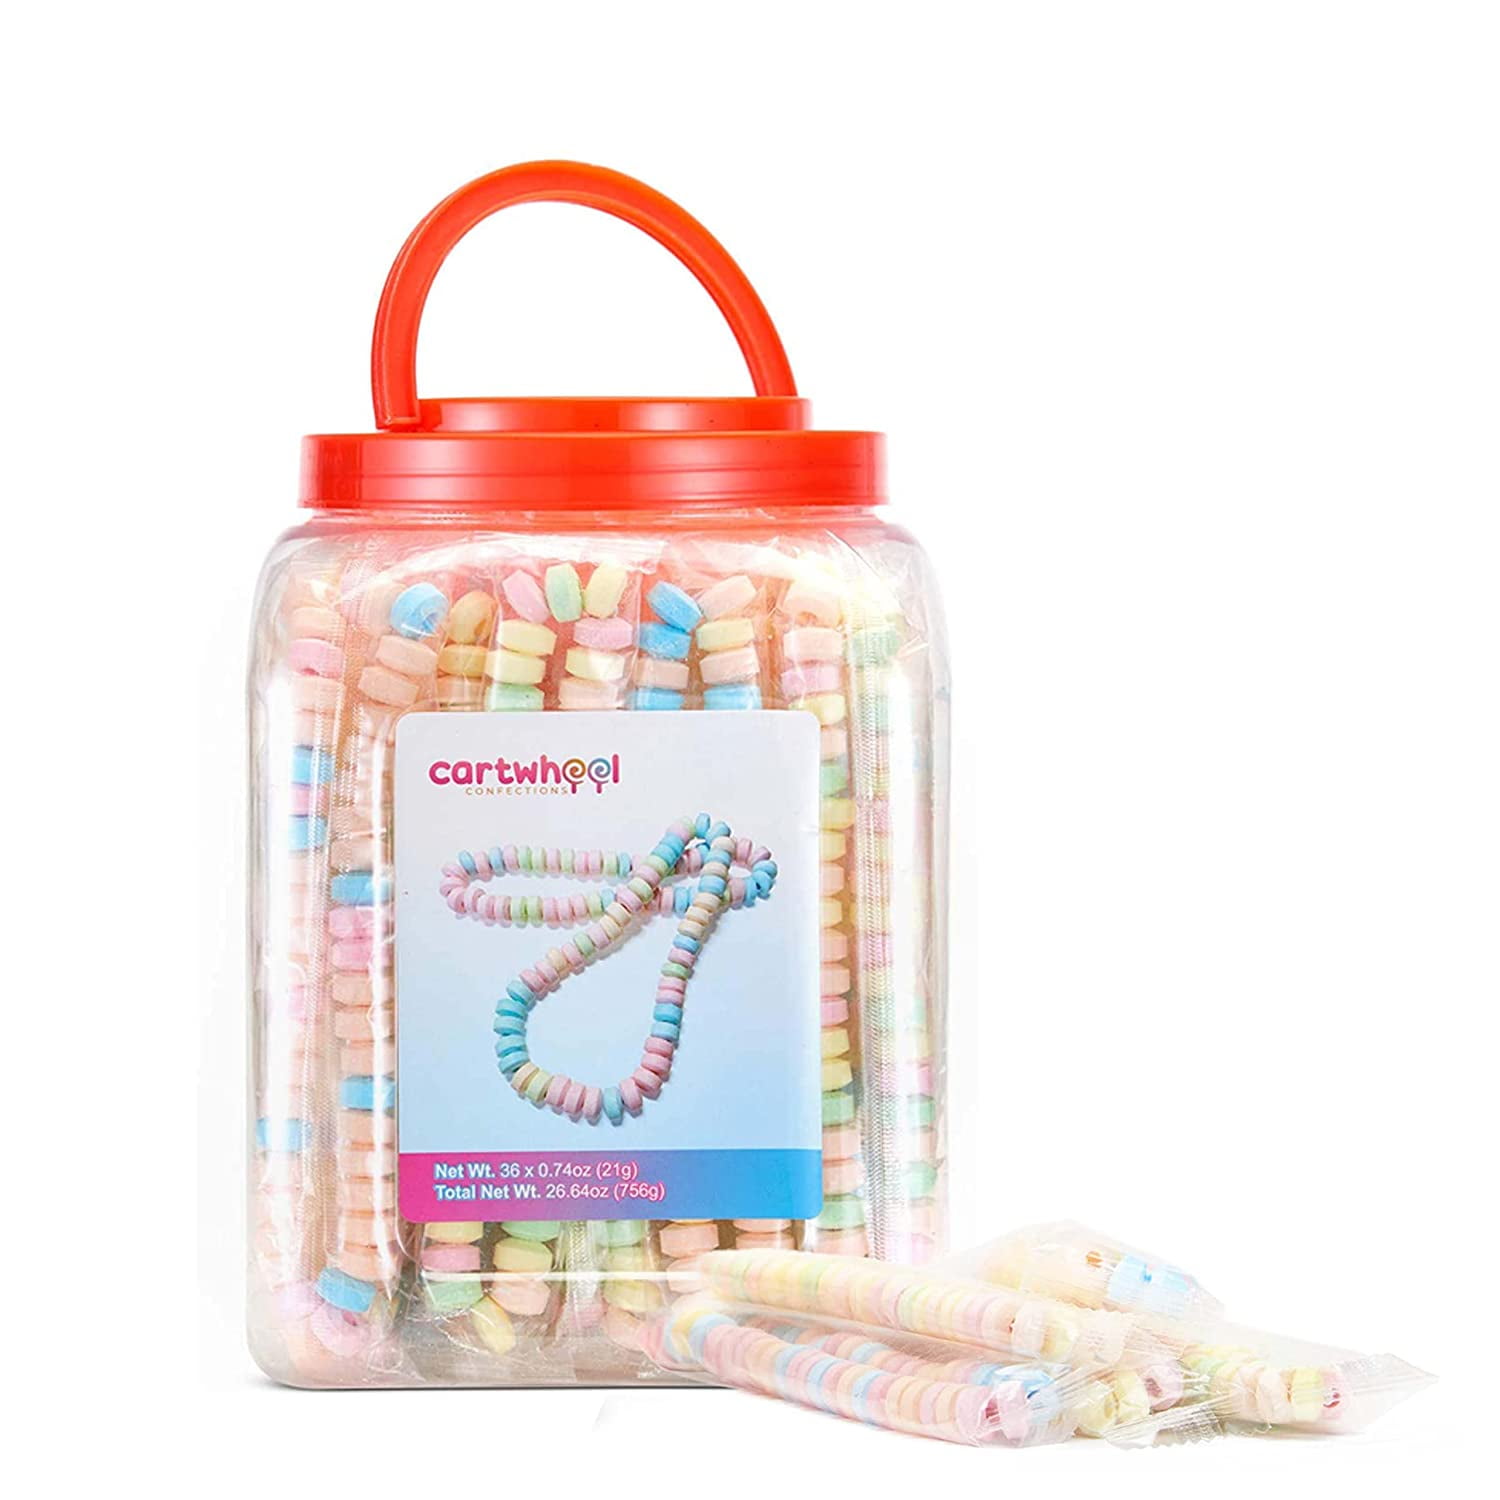 FRESH FINEST Novelty Candy Mix - 54-Count Individually Wrapped Jewelry  Candy Bulk in a Jar - 18 Candy Bracelets, 18 Candy Necklaces, 18 Candy  Rings…